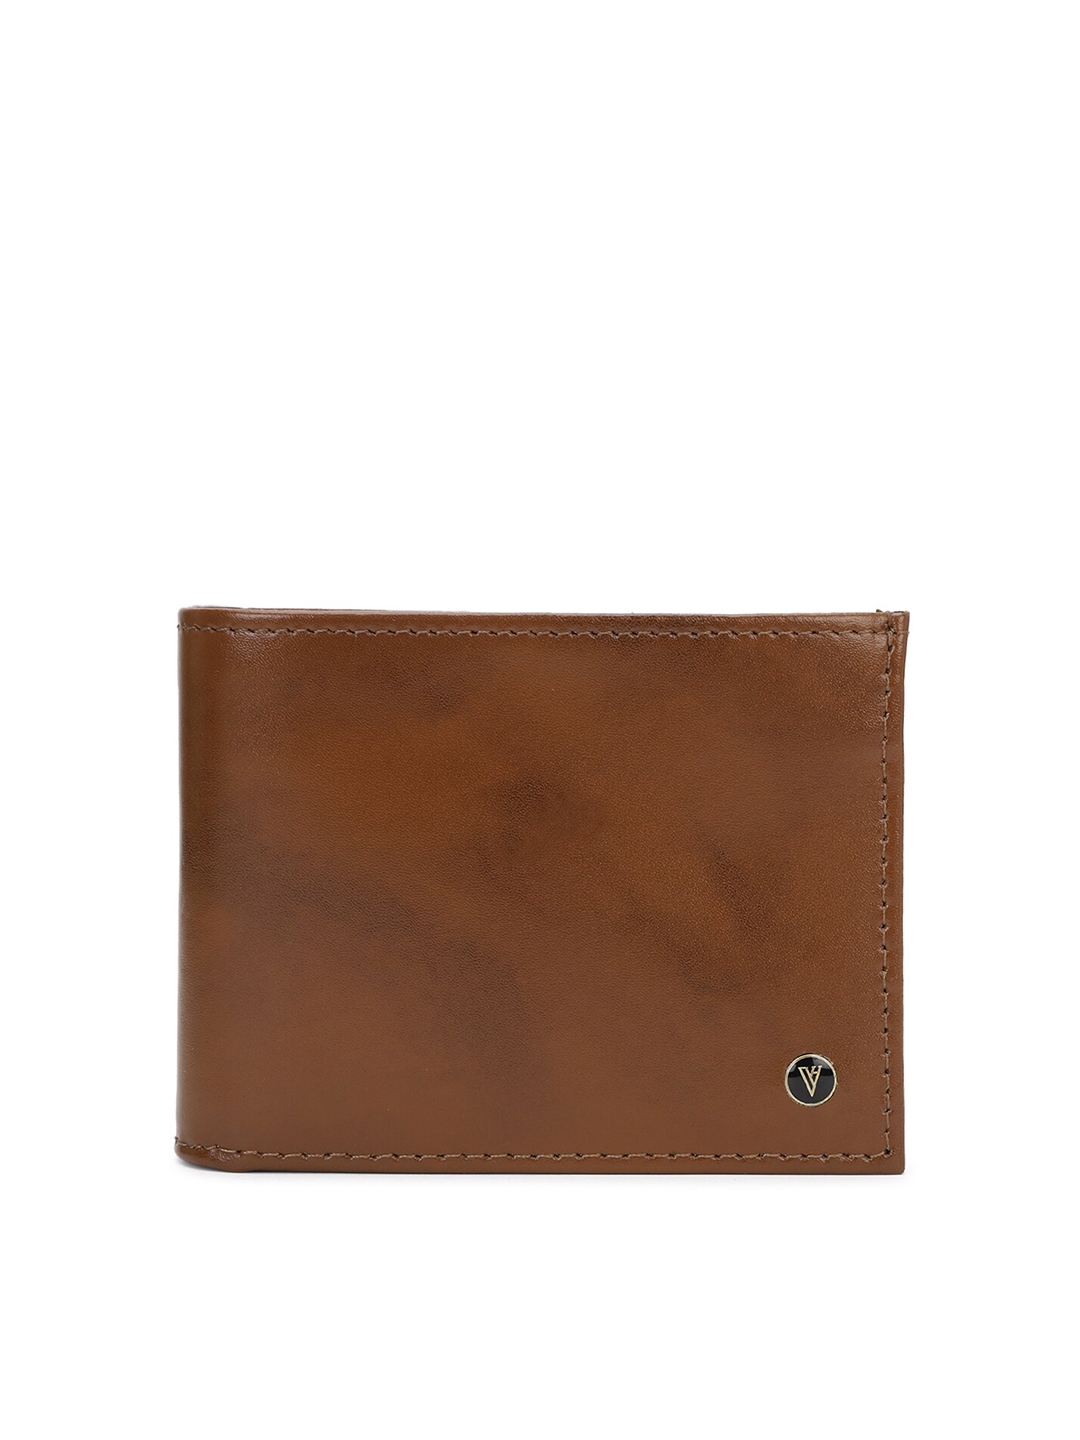 Buy Van Heusen Men Brown Leather Two Fold Wallet With Fap Coin Pocket ...